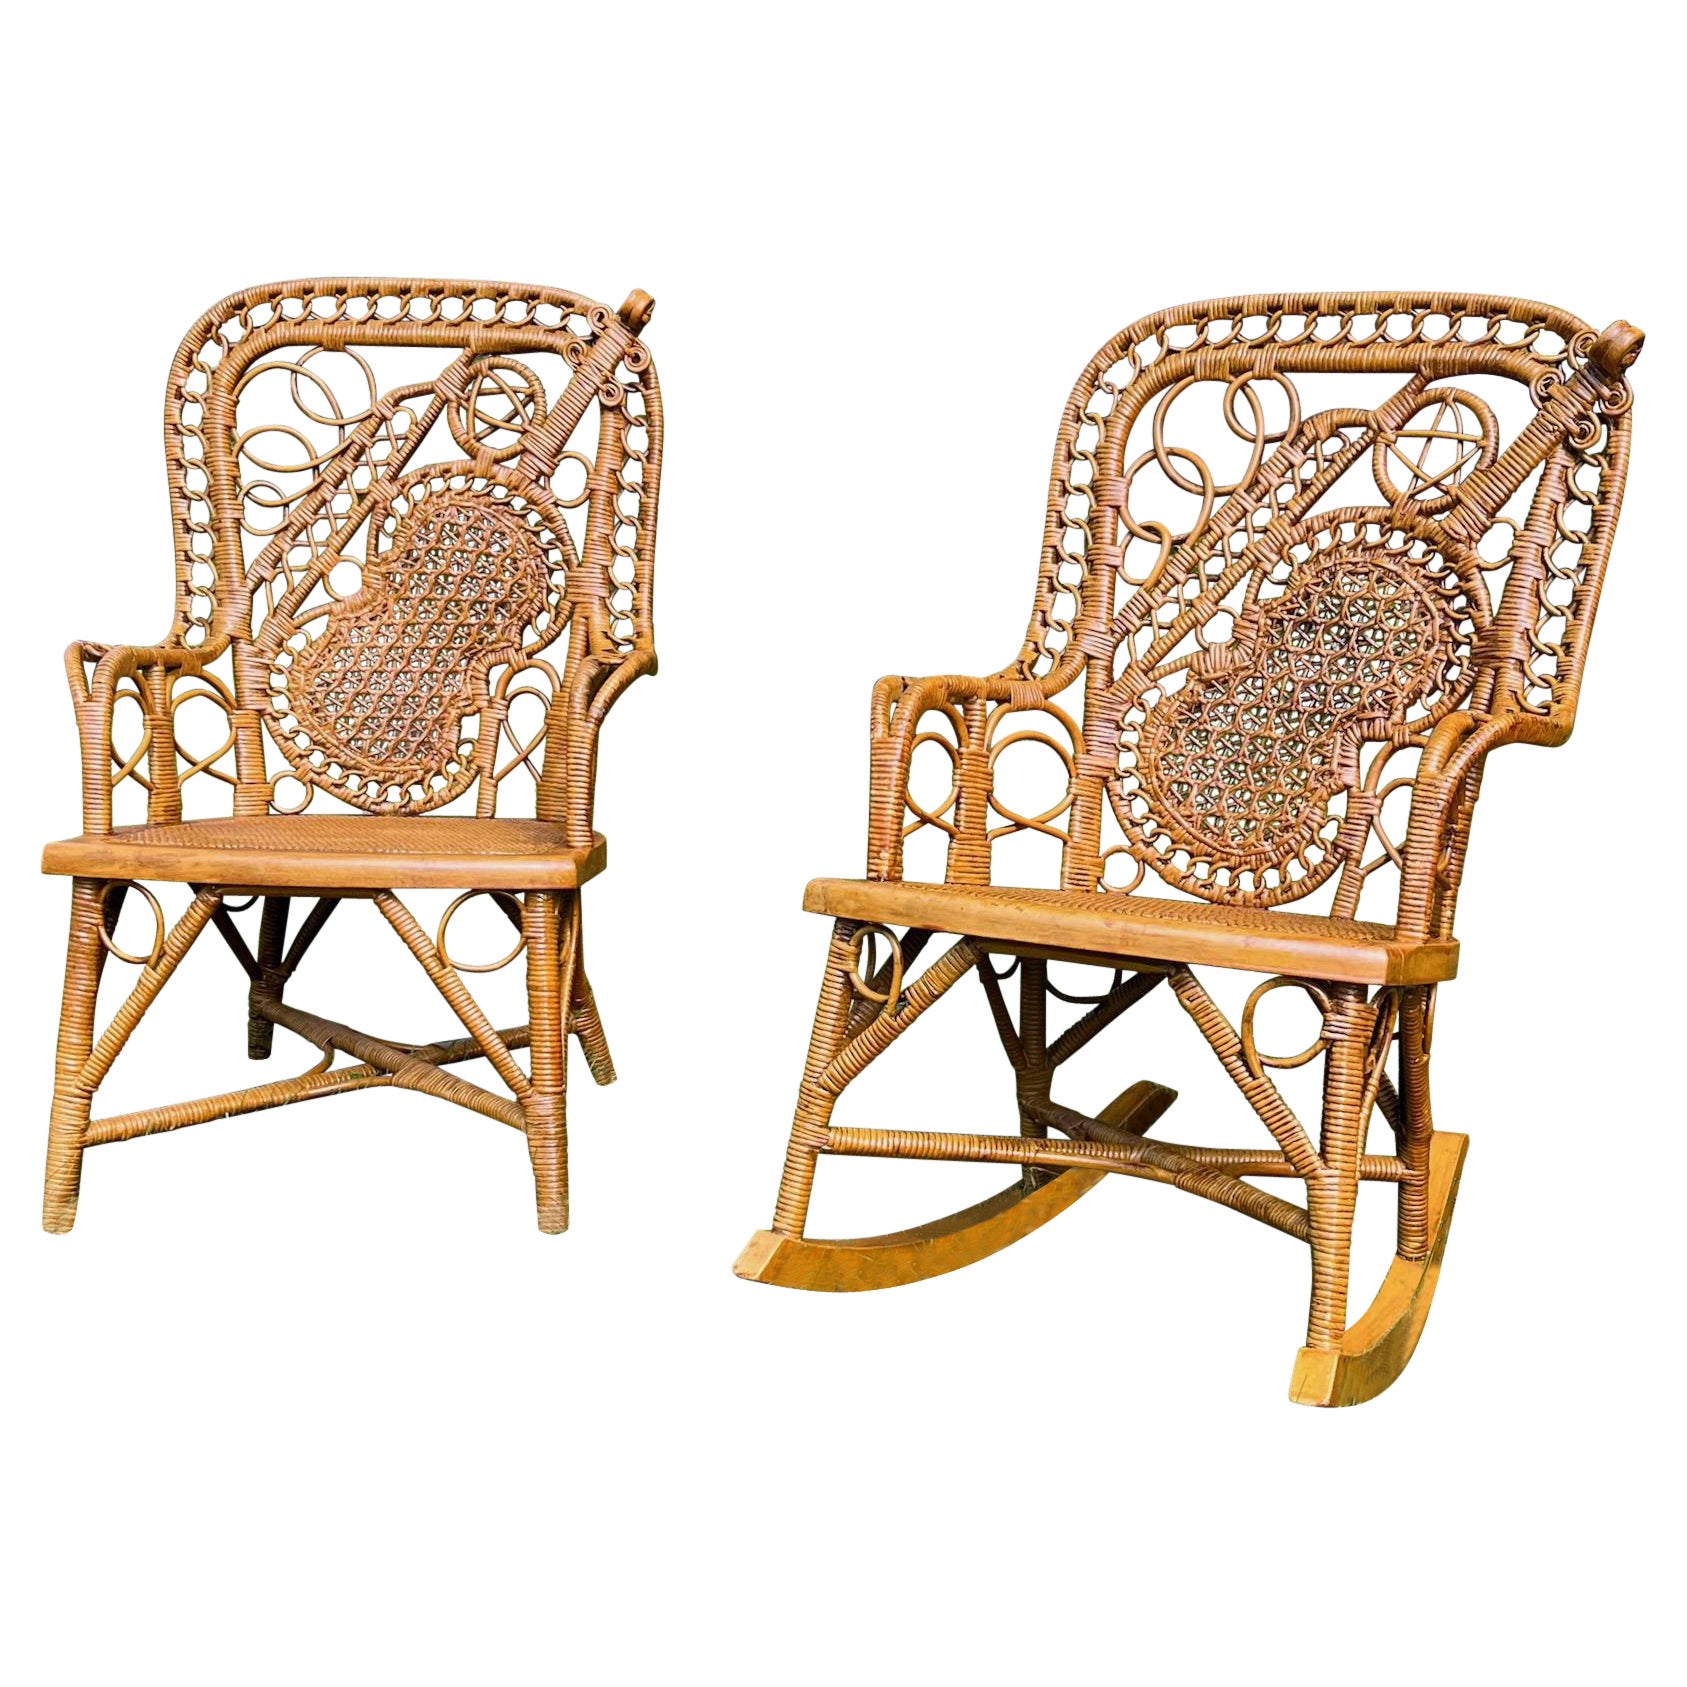 Can all rattan furniture be left outside?